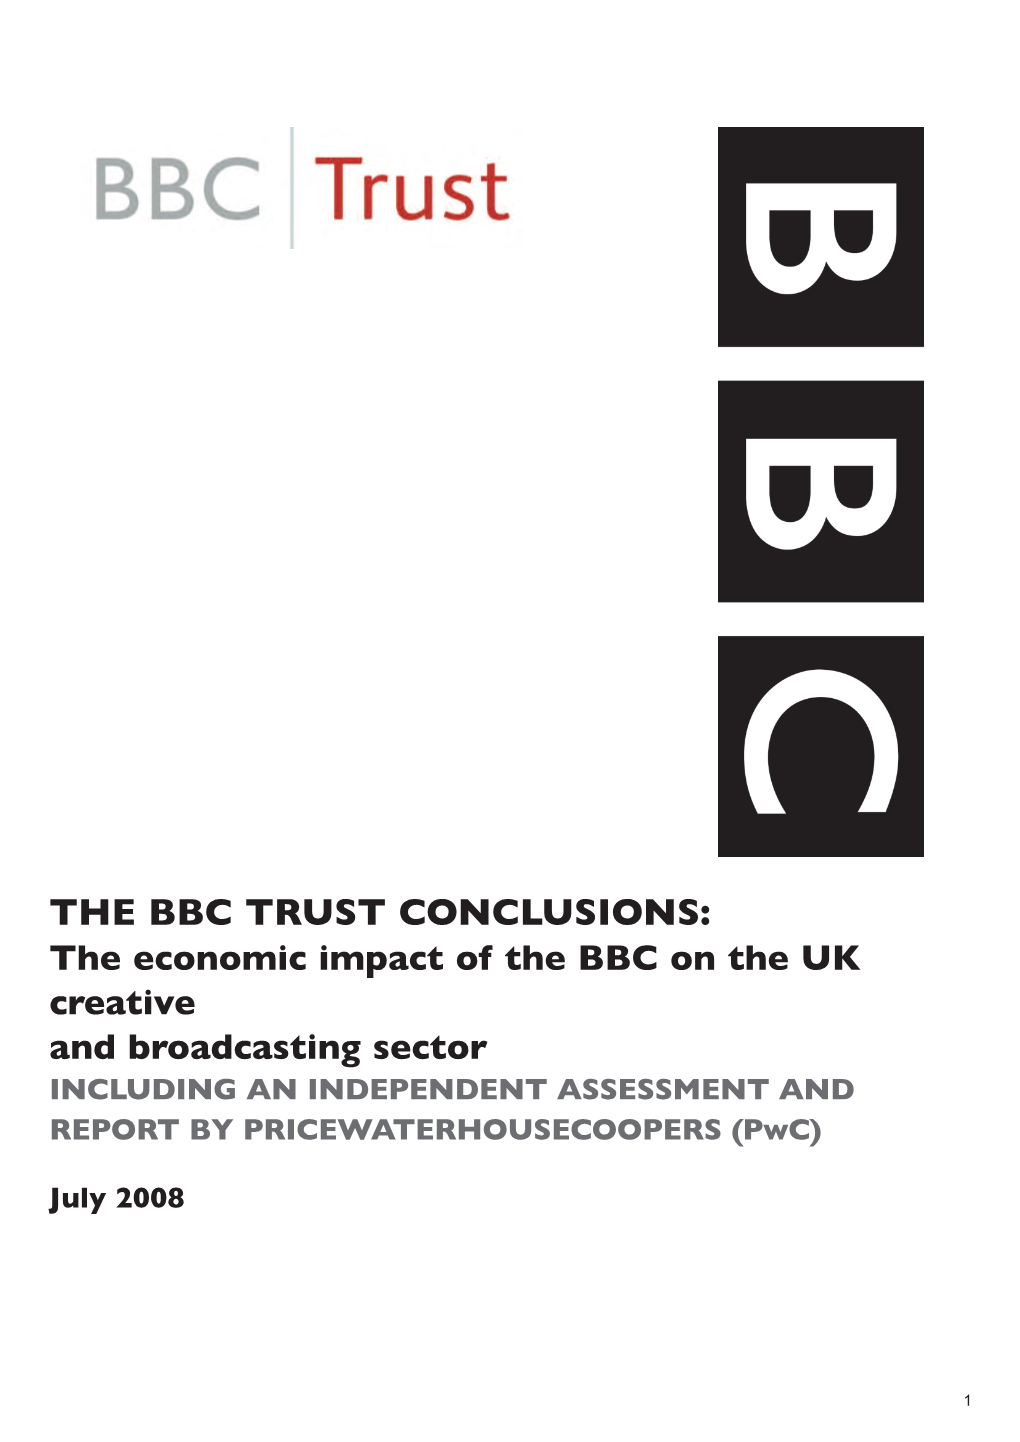 The Economic Impact of the BBC on the UK Creative and Broadcasting Sector INCLUDING an INDEPENDENT ASSESSMENT and REPORT by PRICEWATERHOUSECOOPERS (Pwc)